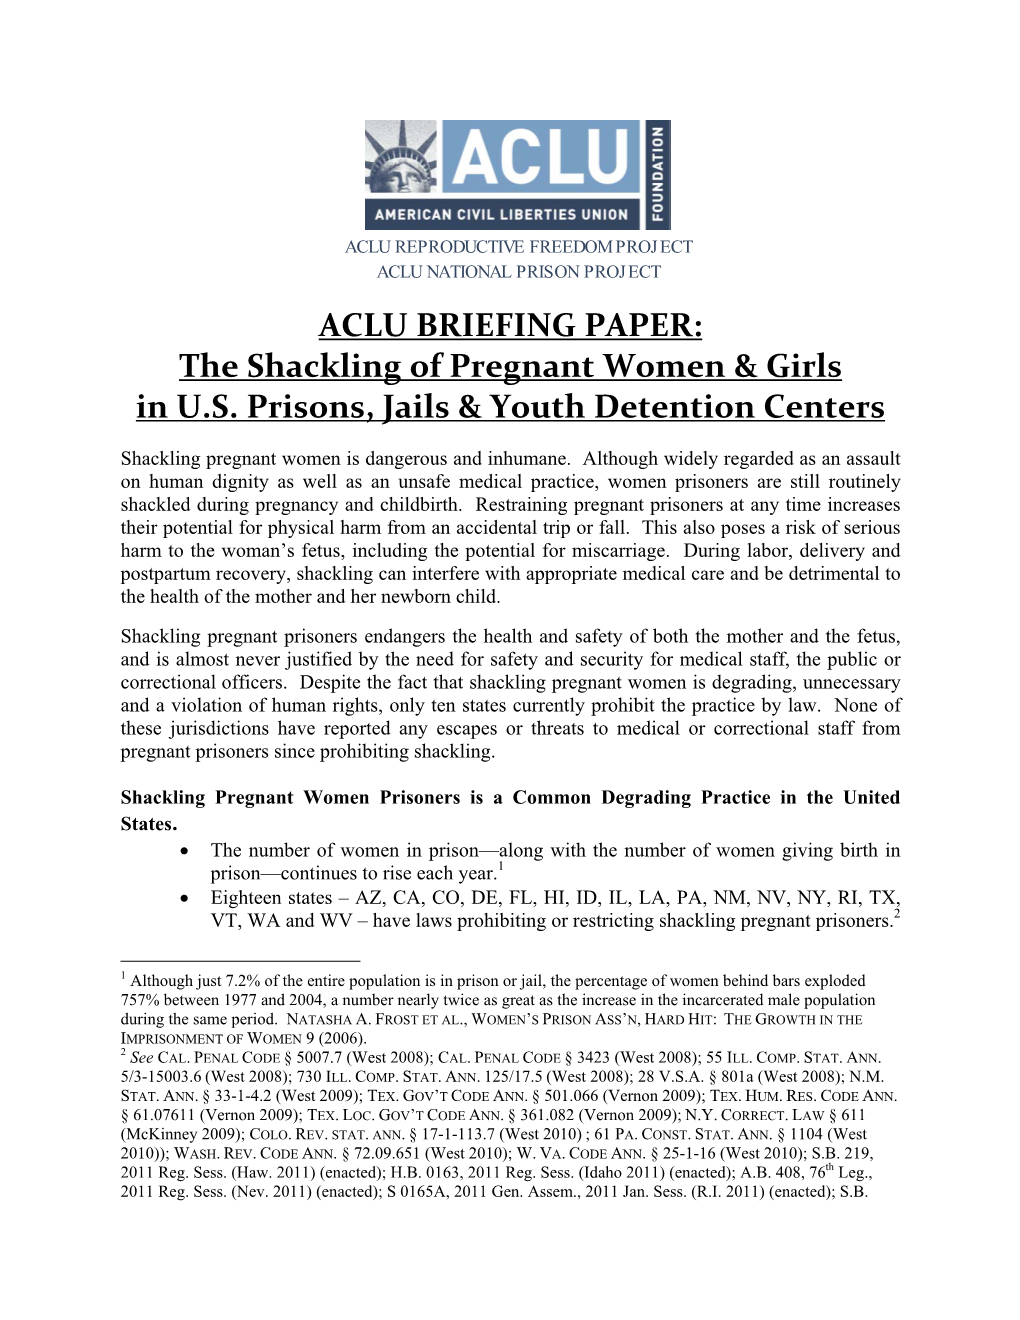 ACLU BRIEFING PAPER: the Shackling of Pregnant Women & Girls in U.S. Prisons, Jails & Youth Dete